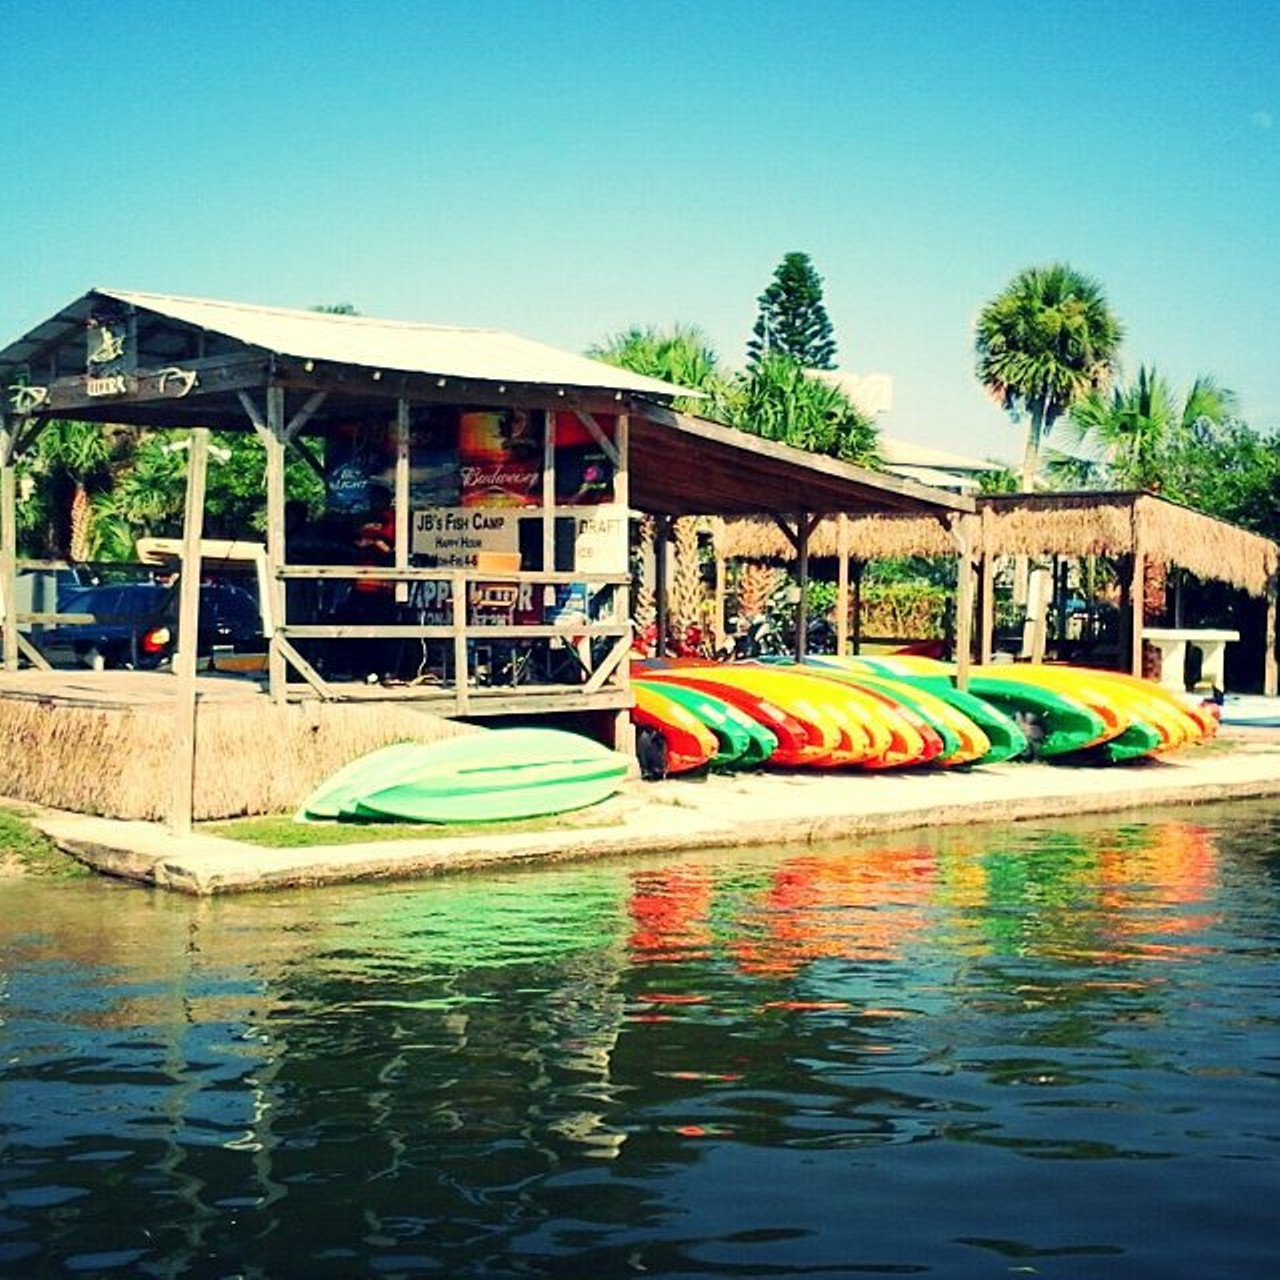 JB&#146;s Fish Camp
859 Pompano Ave, New Smyrna Beach | 386-427-5747
Bring the kids to the JB&#146;s dock for a day of kayaking, canoeing, fishing, whatever water activity you guys are into&#151;it&#146;s all here. While you&#146;re sipping on an ice cold Rolling Rock (or two), don&#146;t be surprised if you see a manatee or dolphin splashing around in the water.
Photo via jocahontas_elaine/Instagram